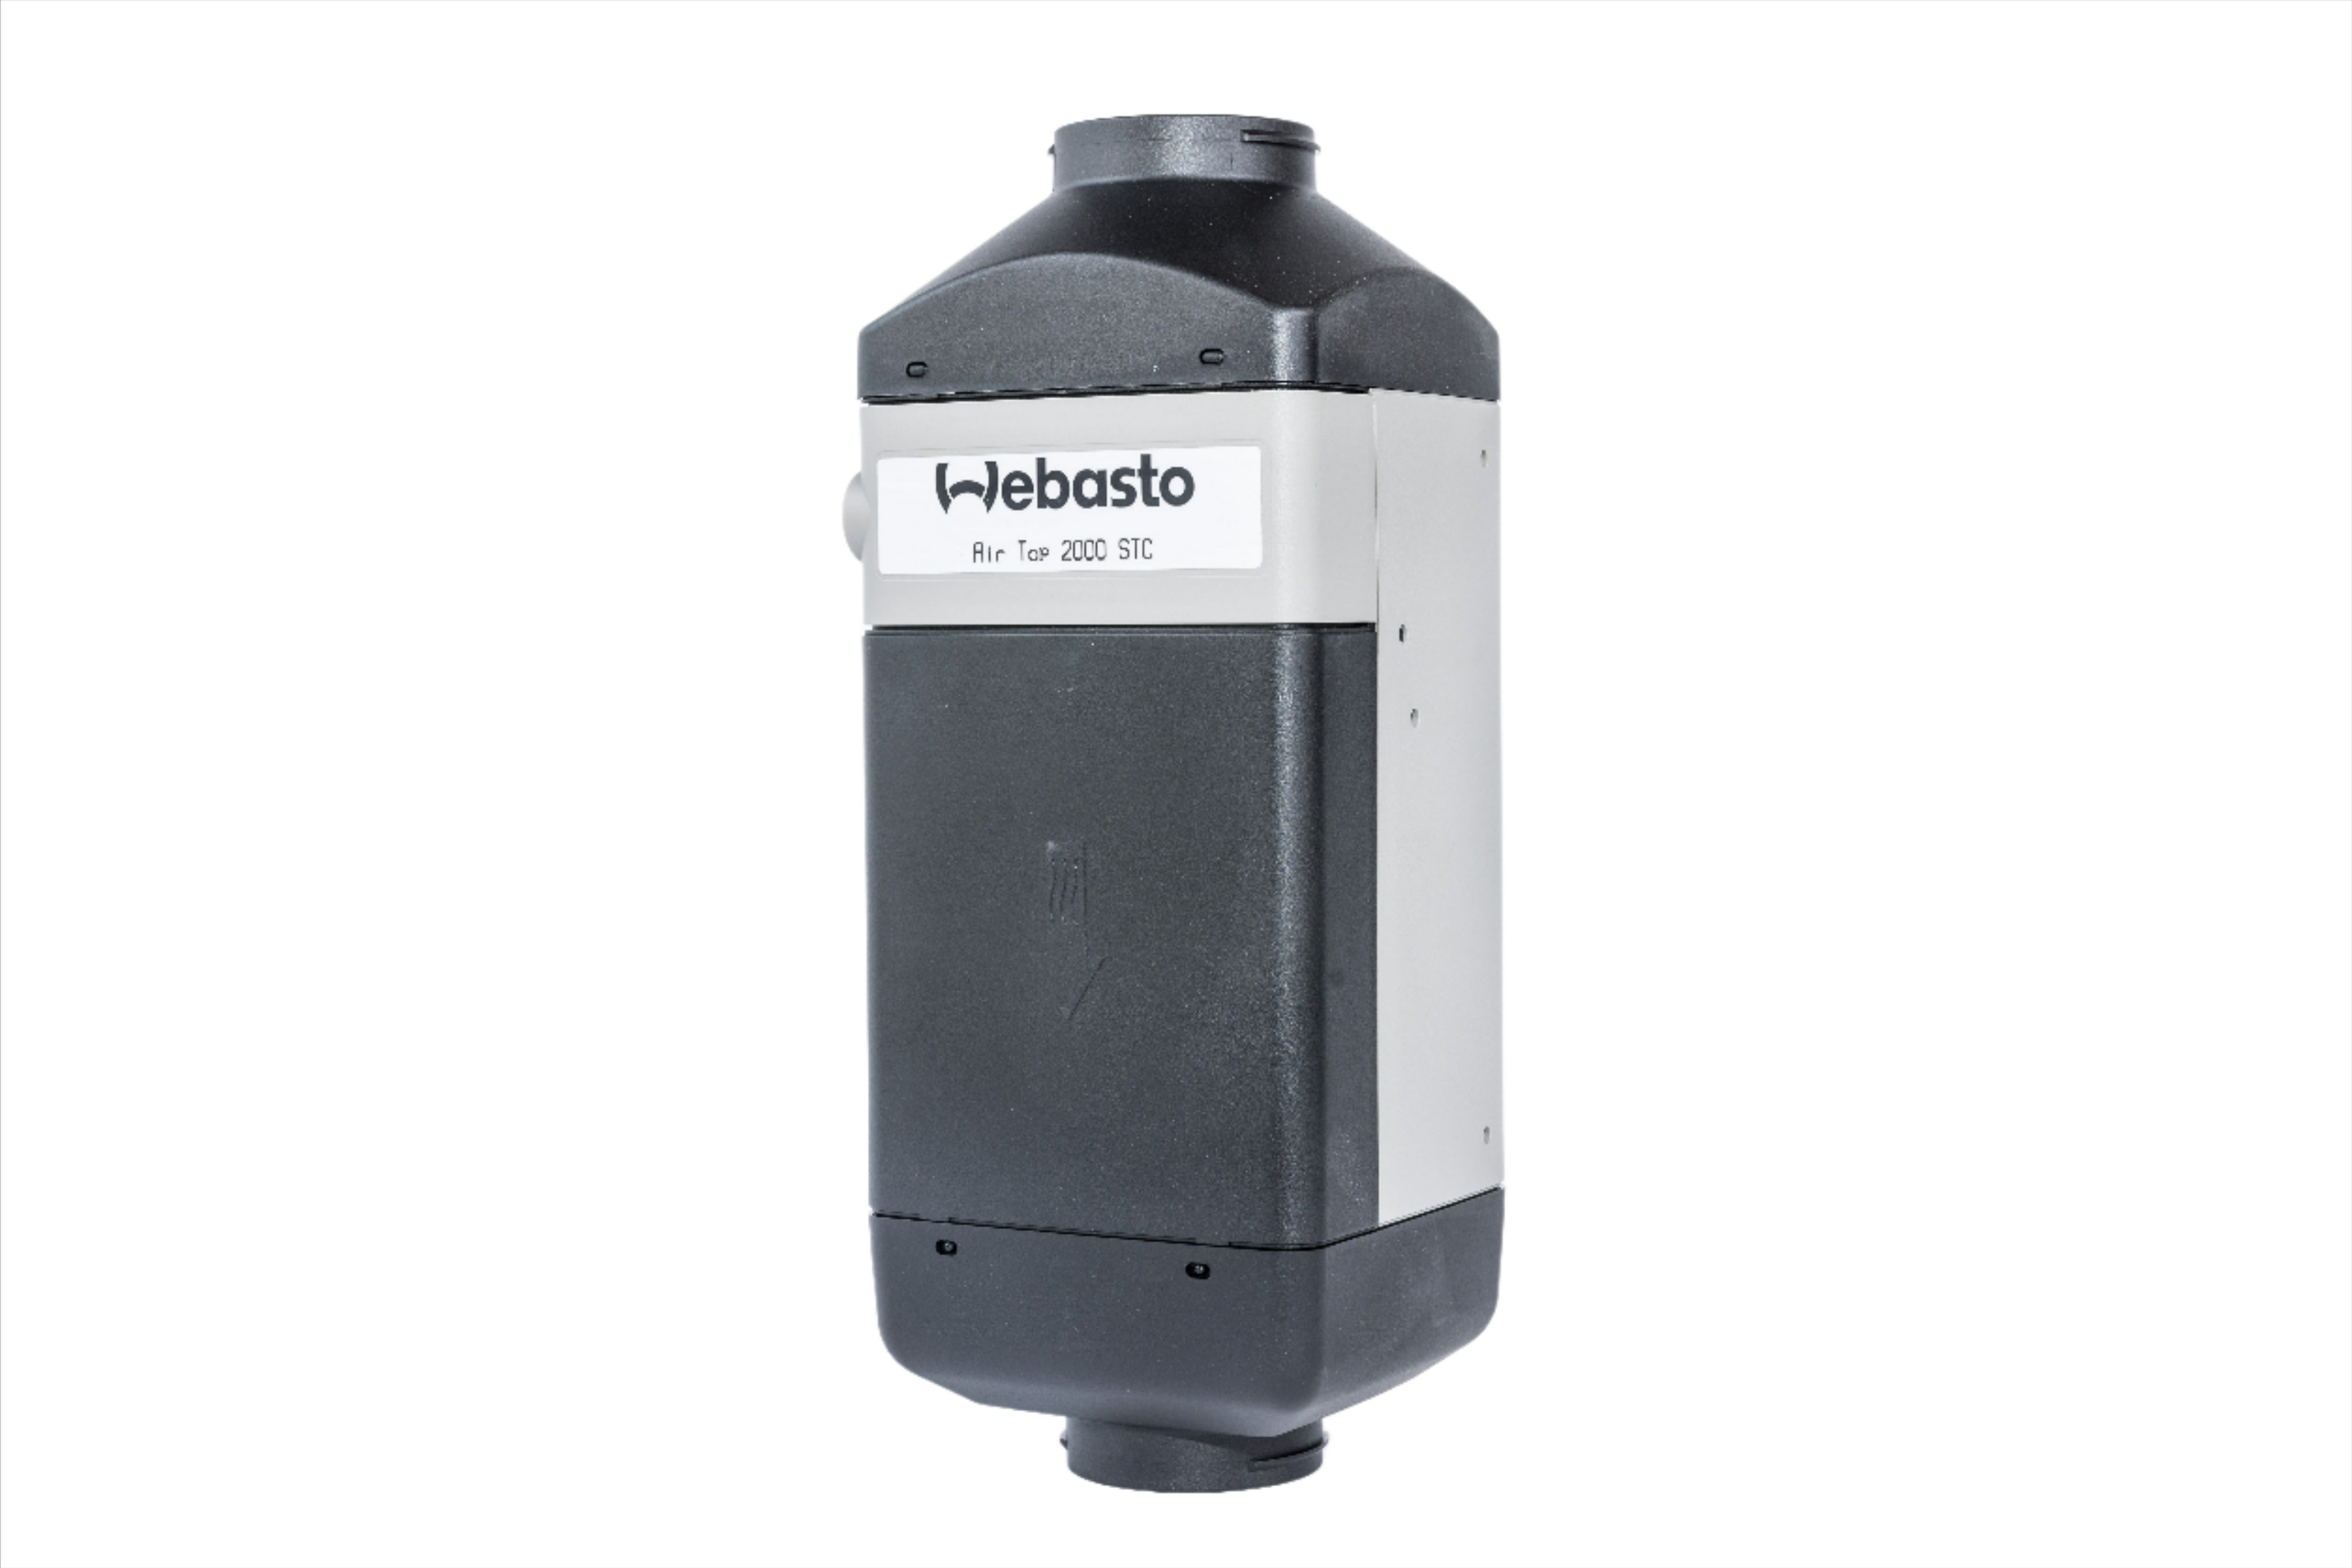 Webasto Air Top 2000 Stc Replacement 12V 2Kw Gasoline Heater 9034525B Replacement